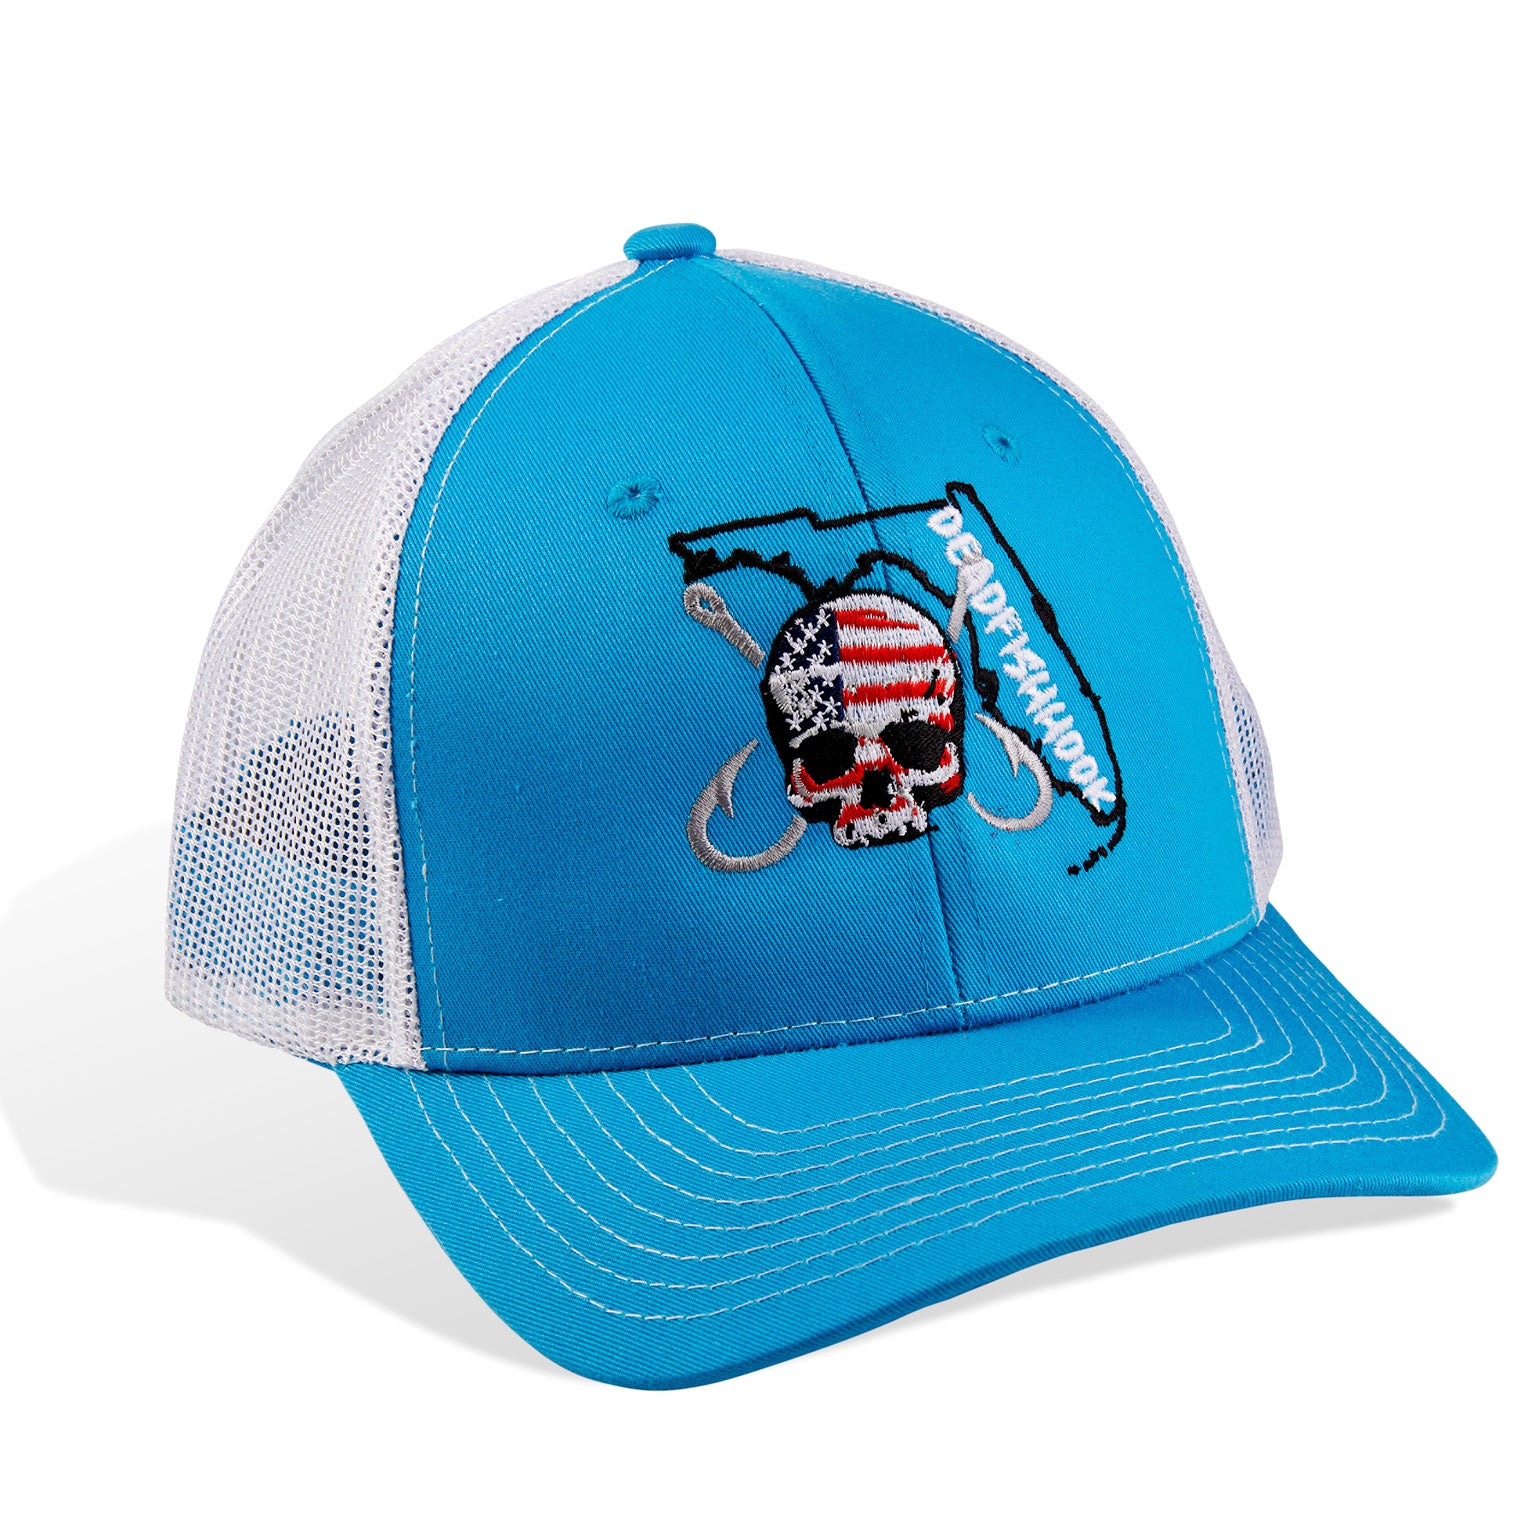 Dead Fish Hook light blue patriotic logo Florida trucker hat with white details front view